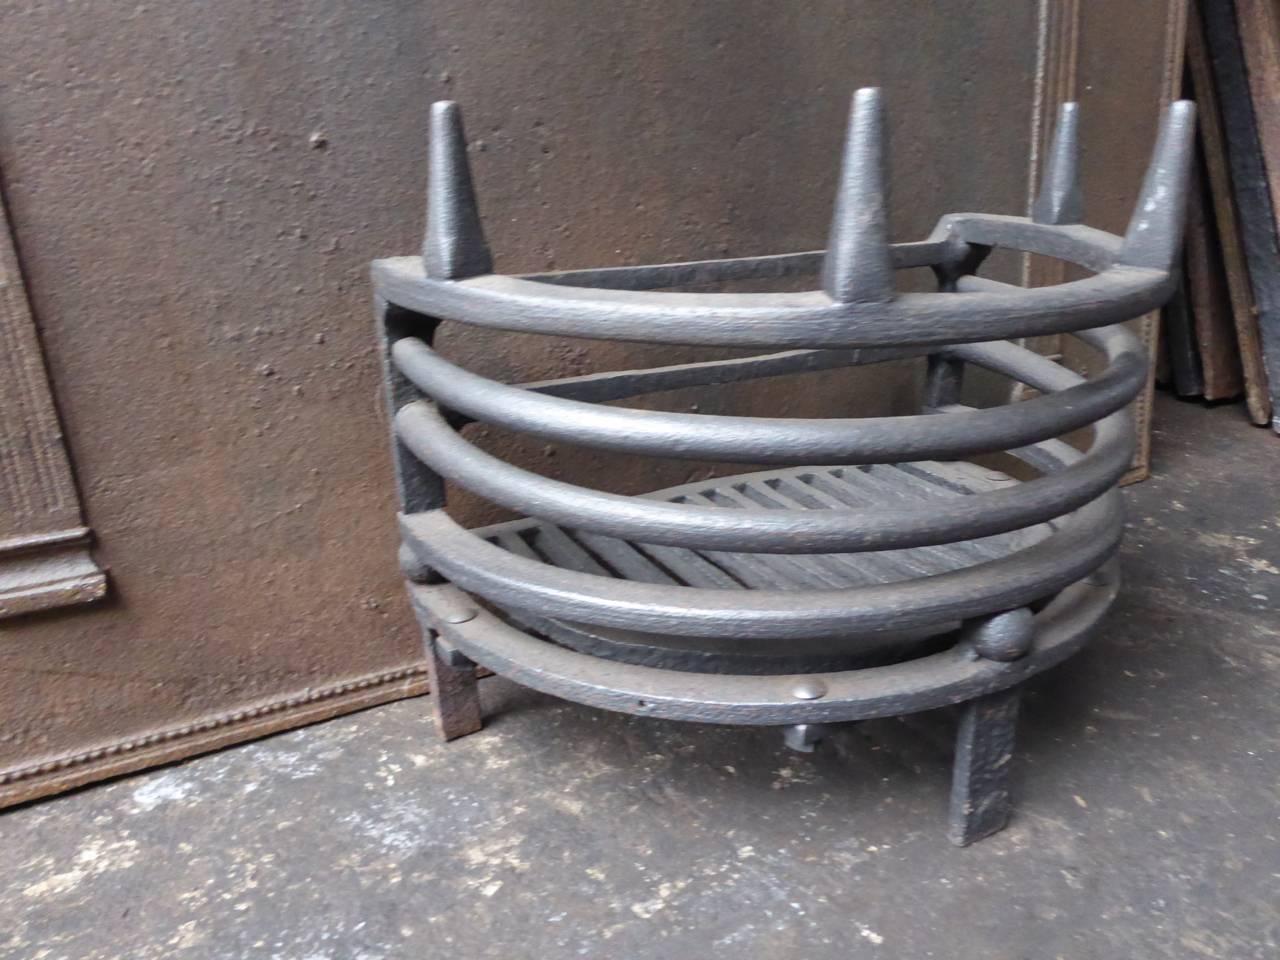 20th Century English Fire Grate - Fire Basket